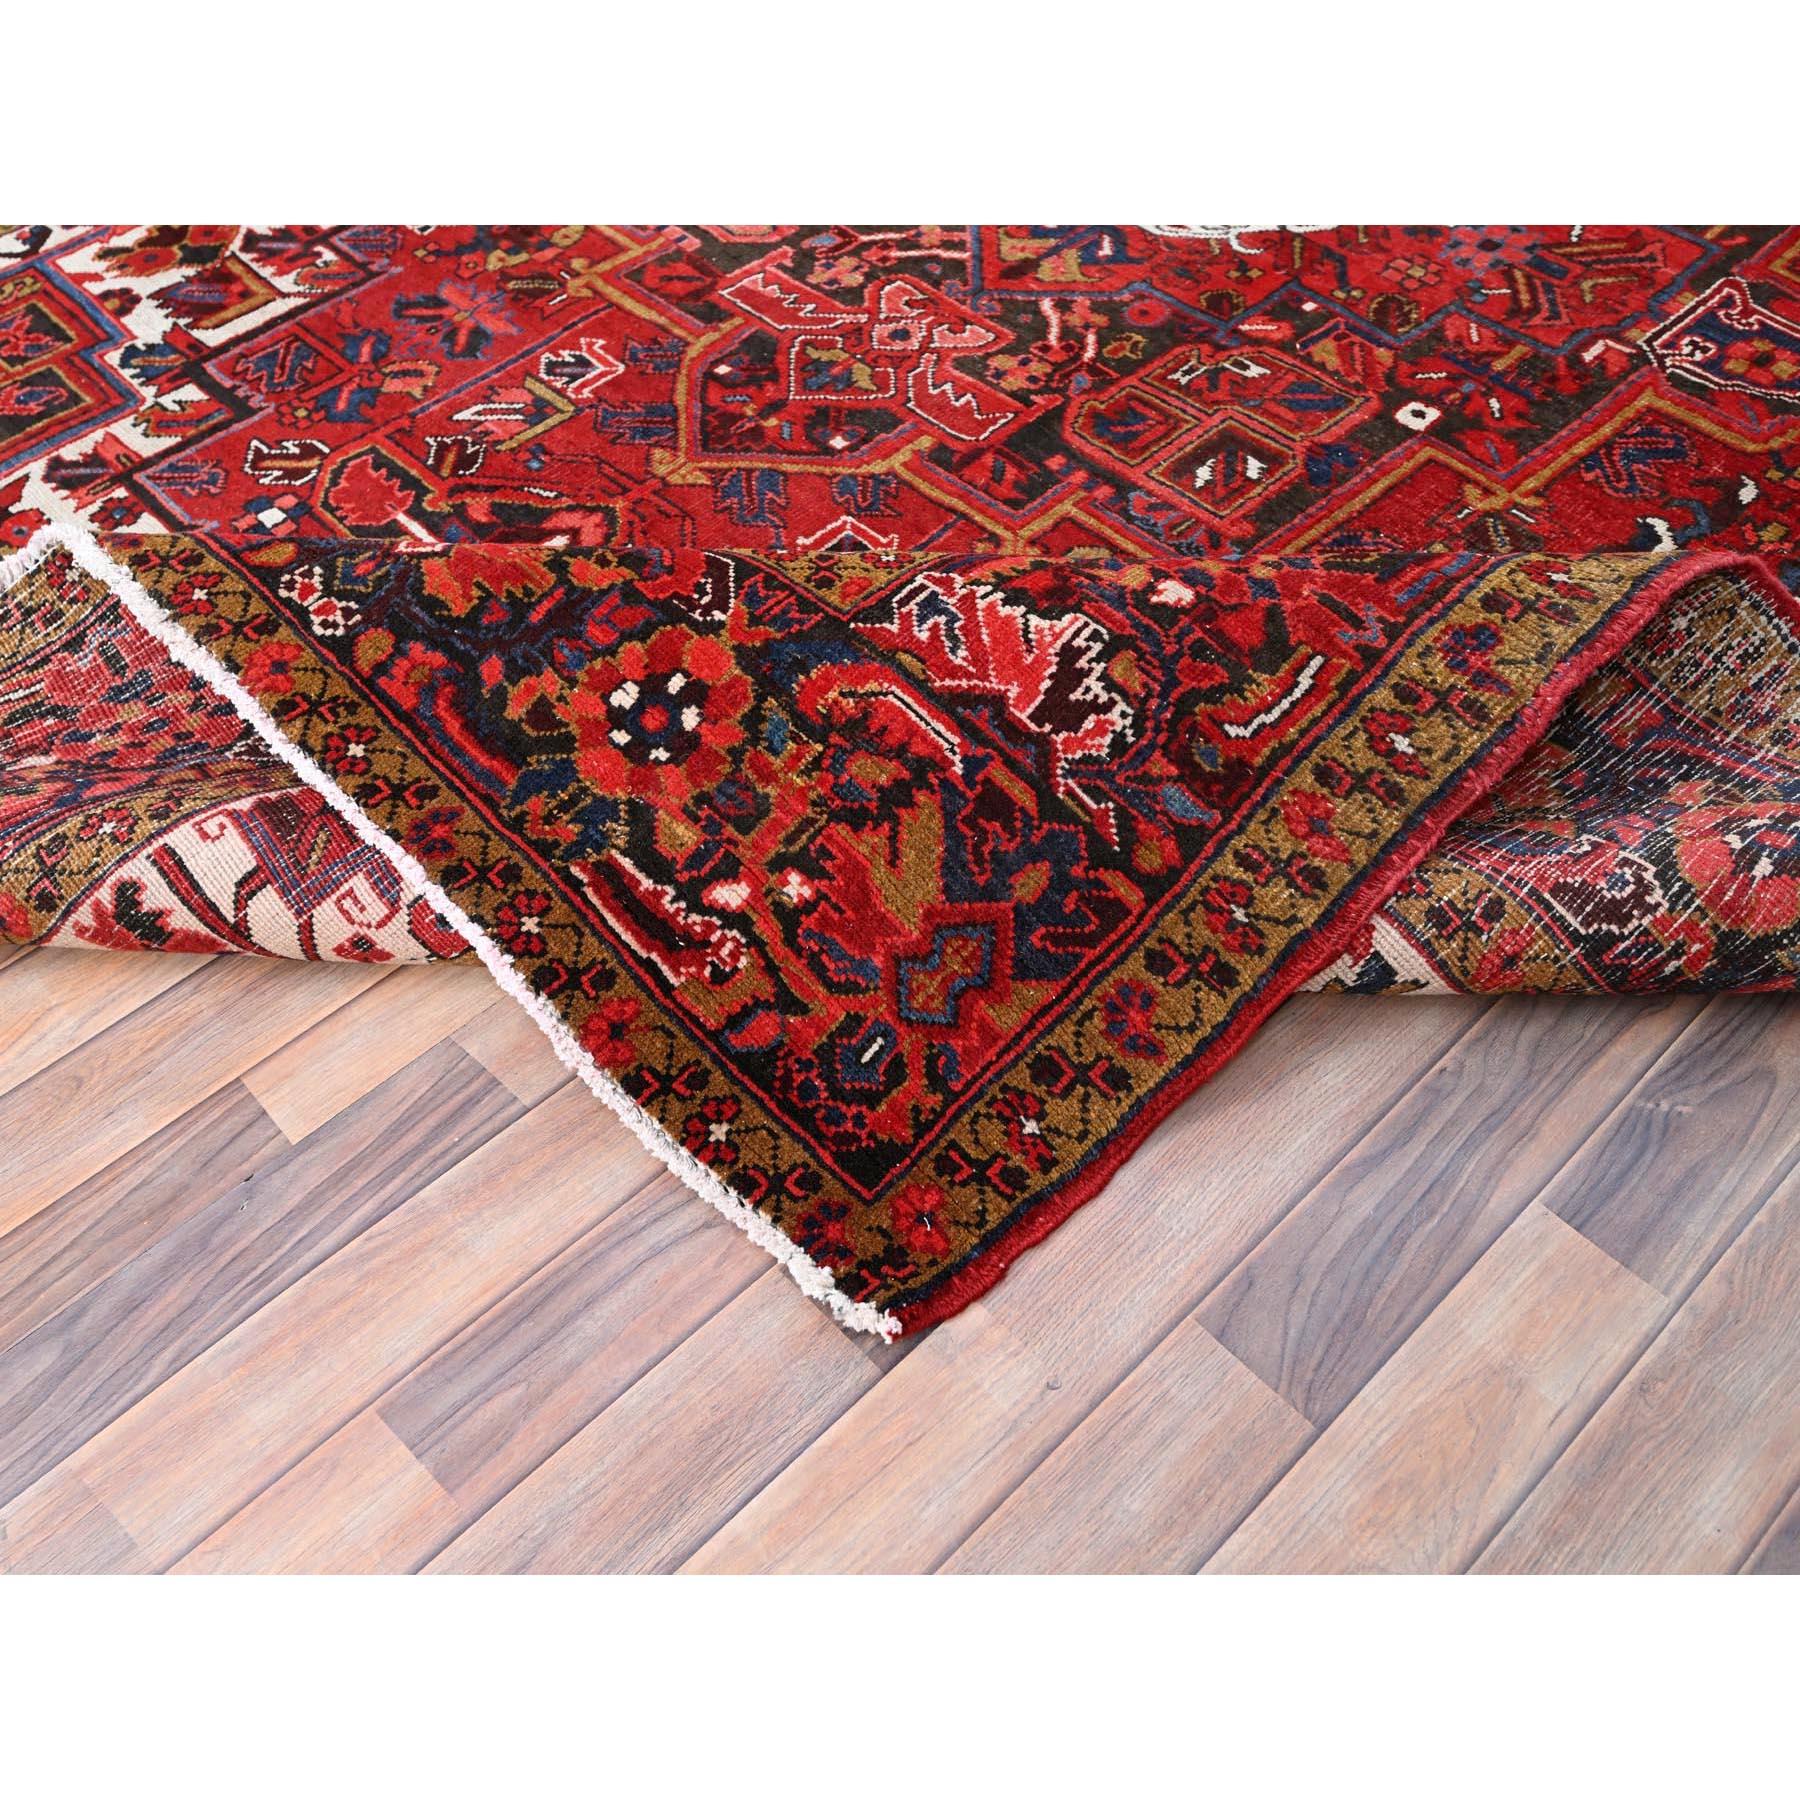 Barn Red Vintage Persian Heriz Good Cond Rustic Look Worn Wool Hand Knotted Rug For Sale 2